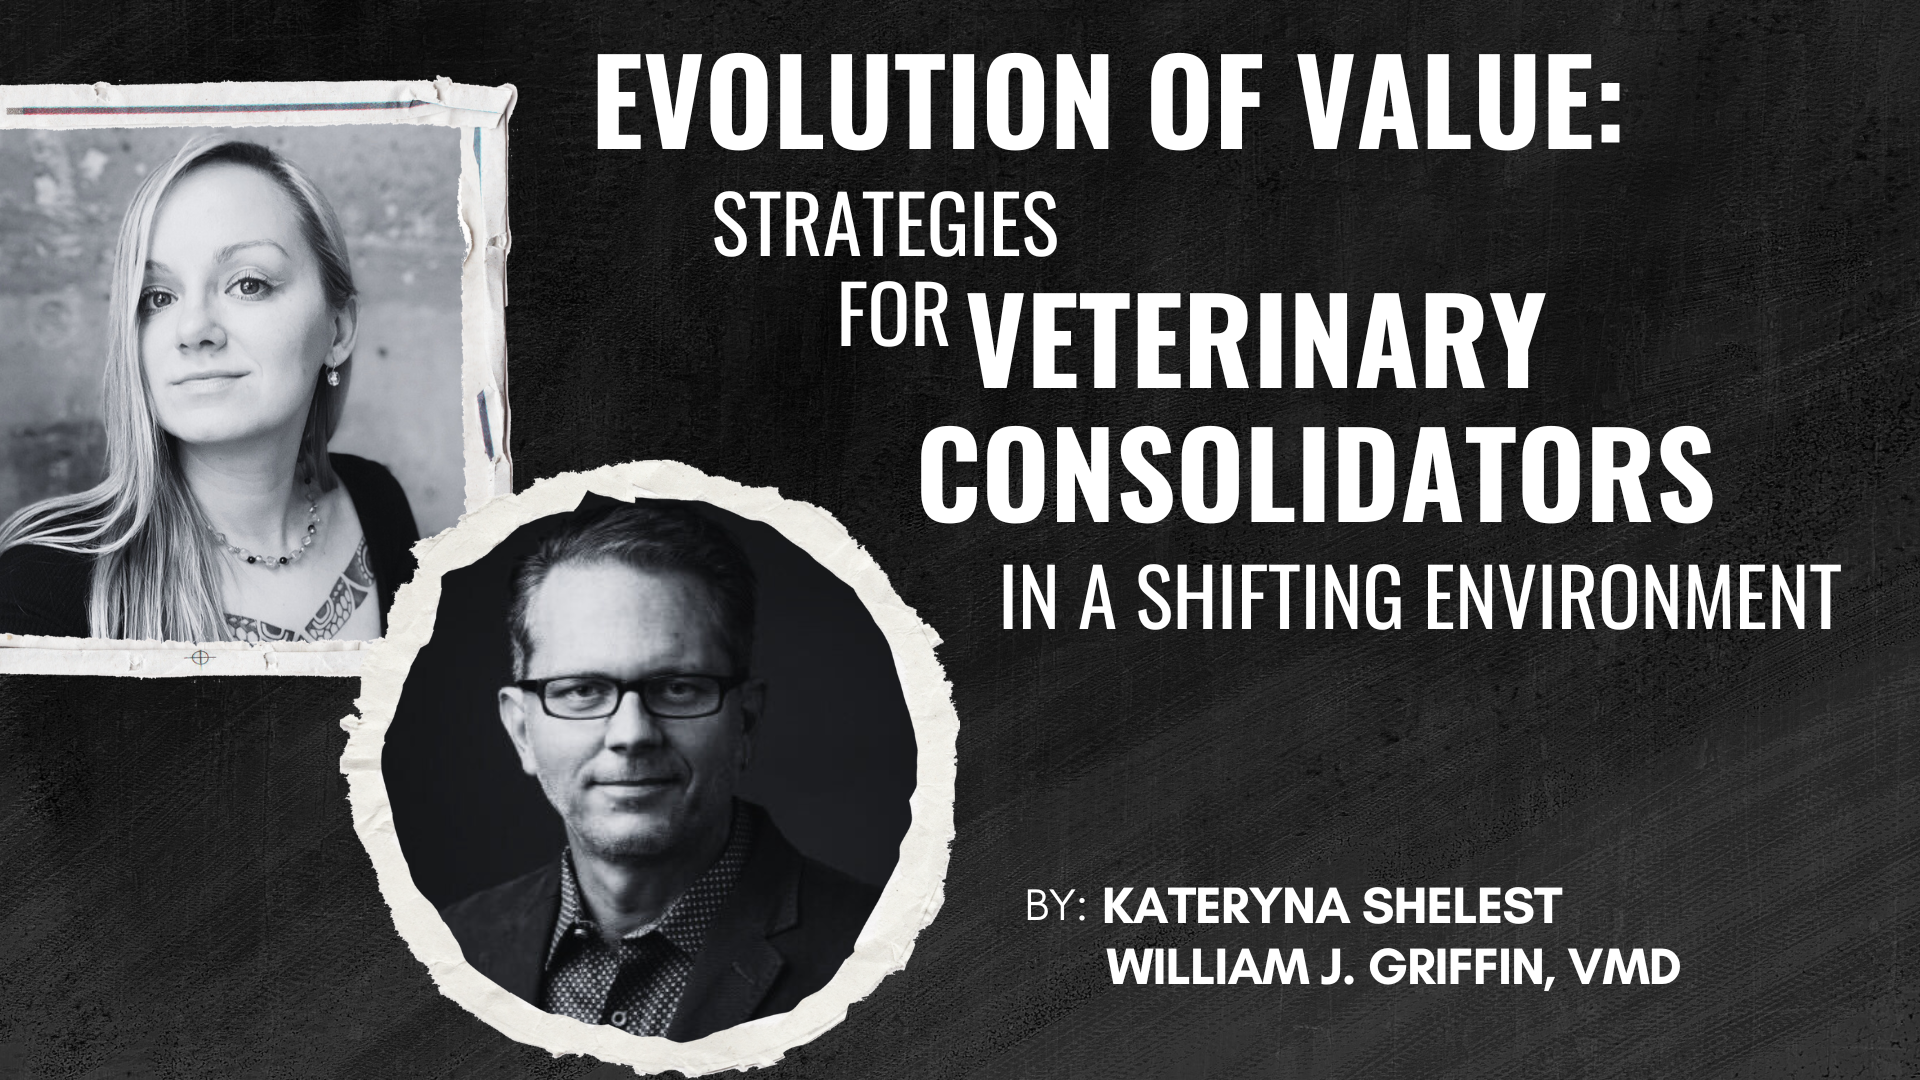 By Kate Shelest, CEO of Katico, and William Griffin, DVM, Founder of VetEcoSystem.